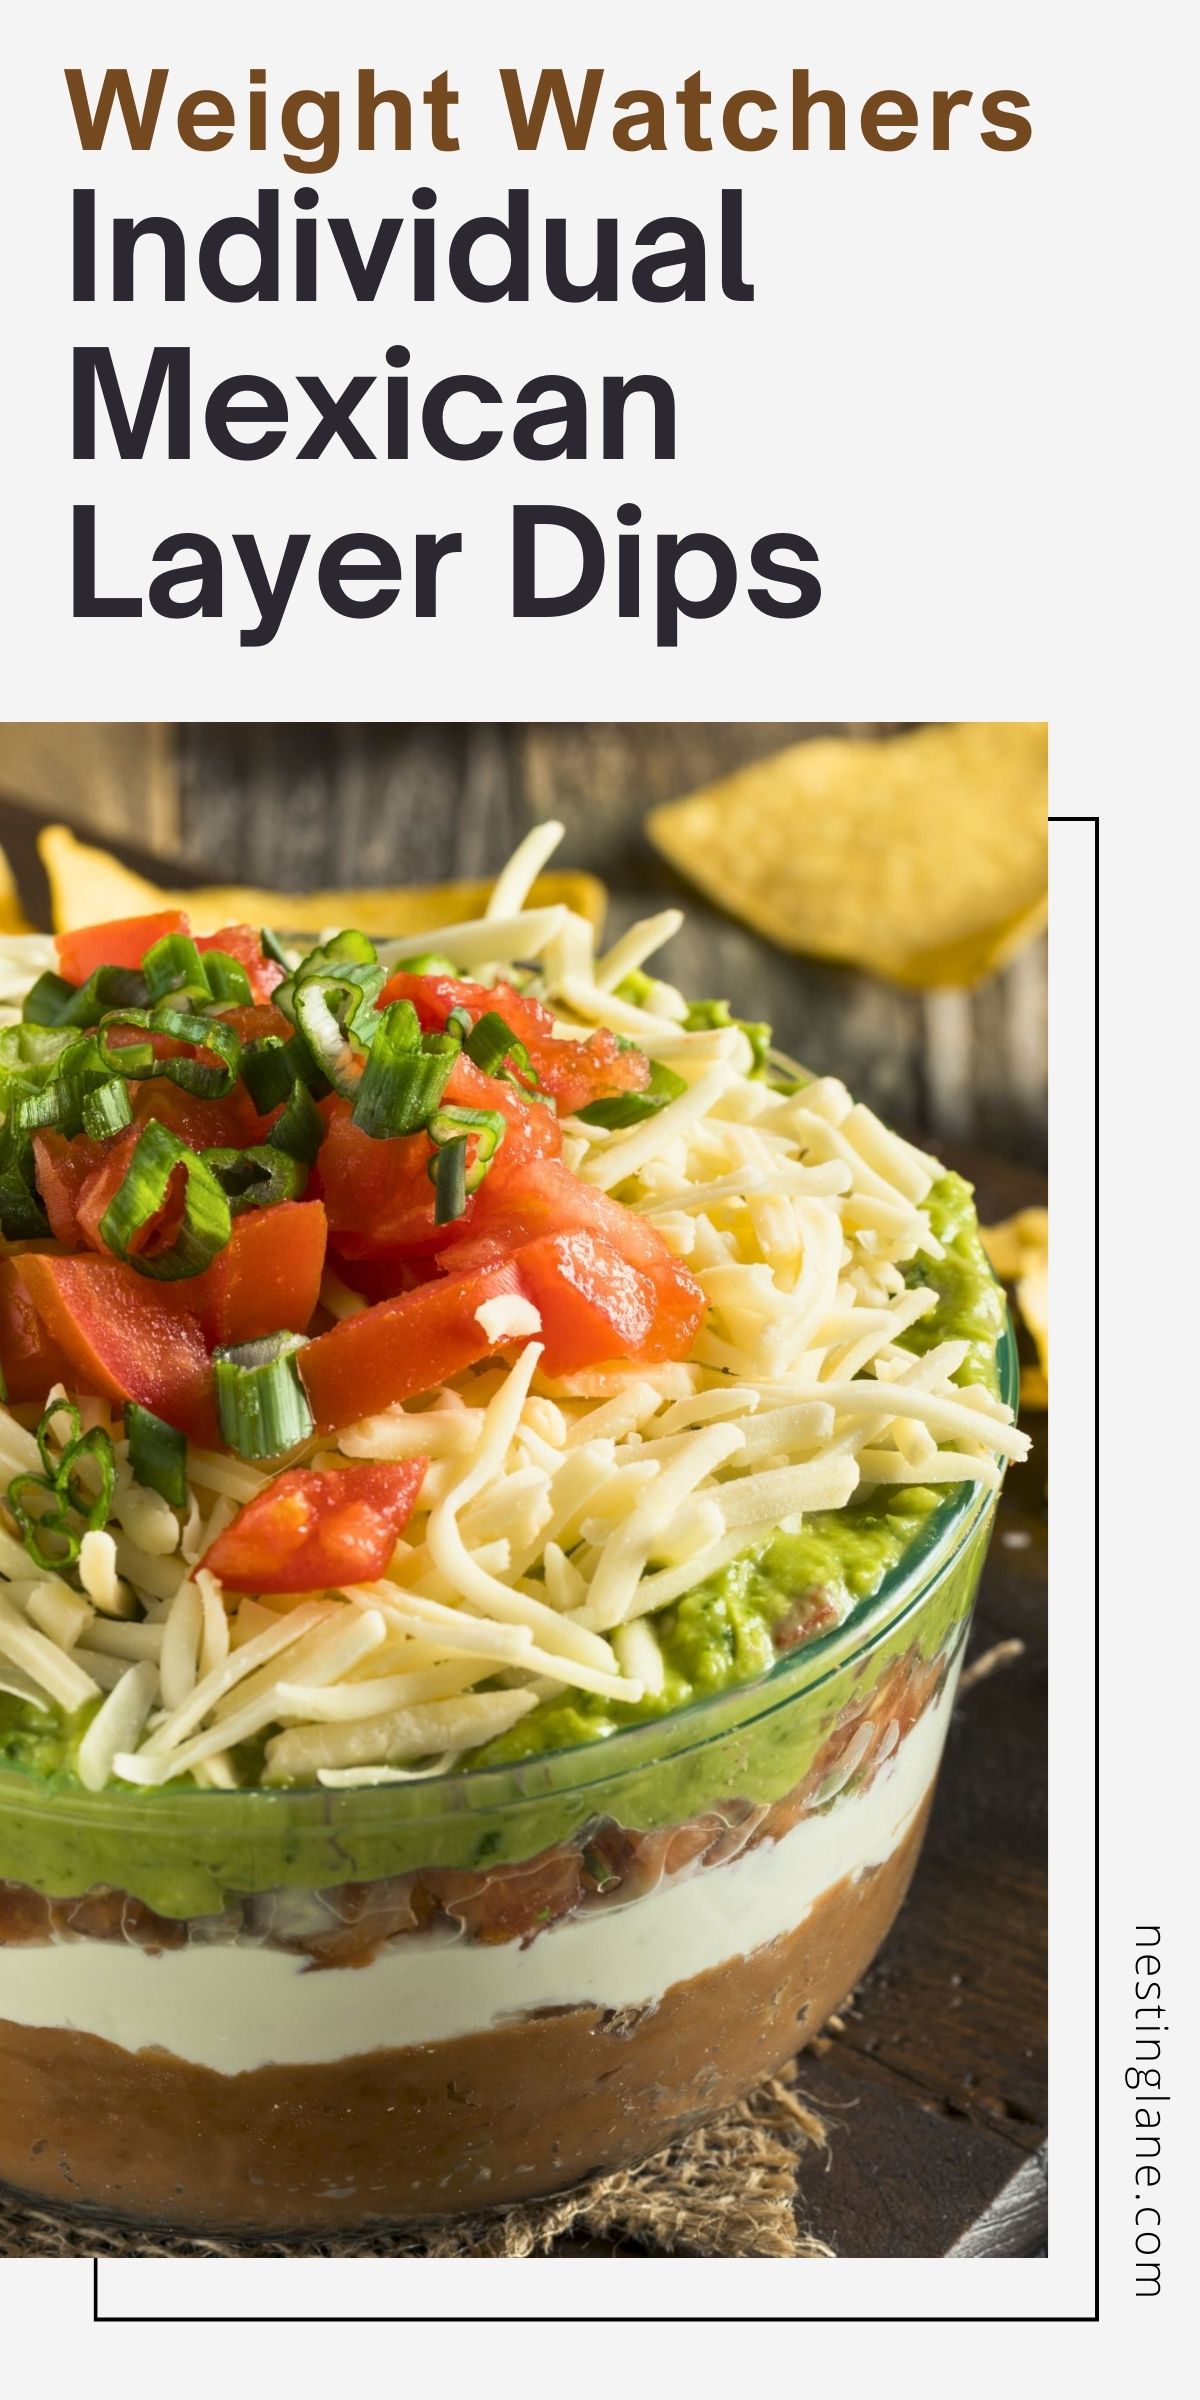 Individual Mexican Layer Dips Recipe Graphic.